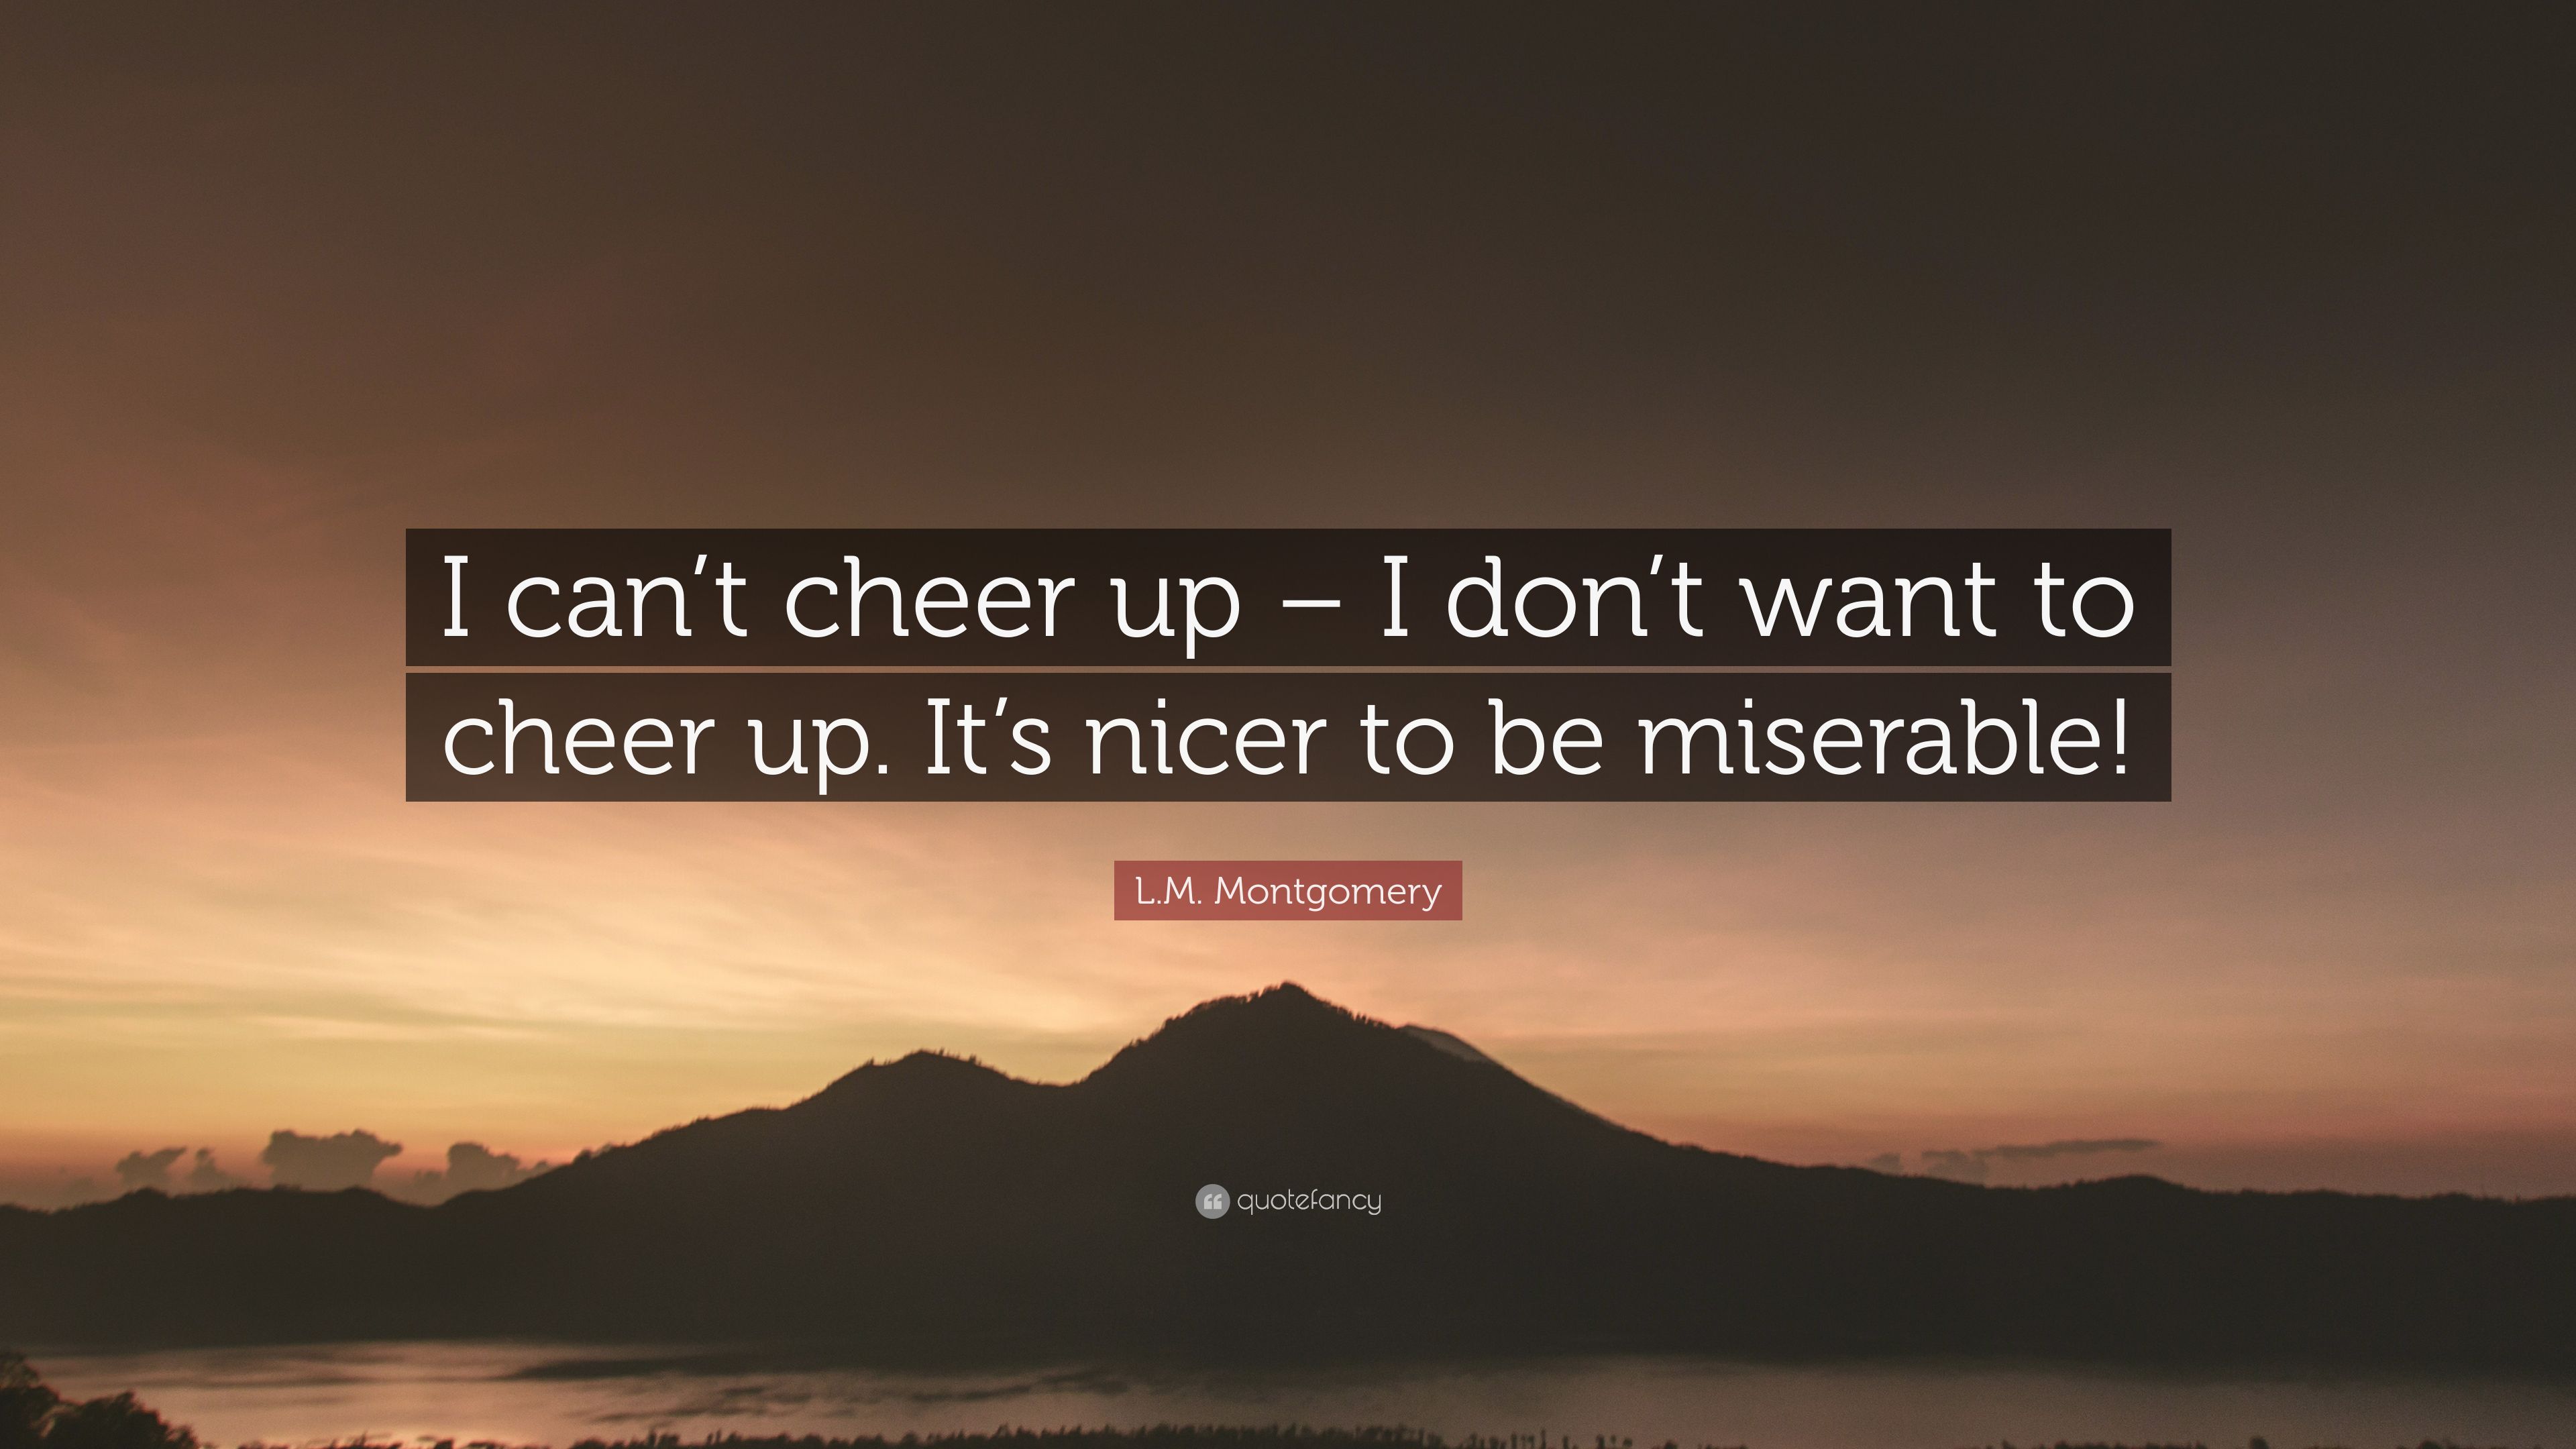 L.M. Montgomery Quote: “I can't cheer up